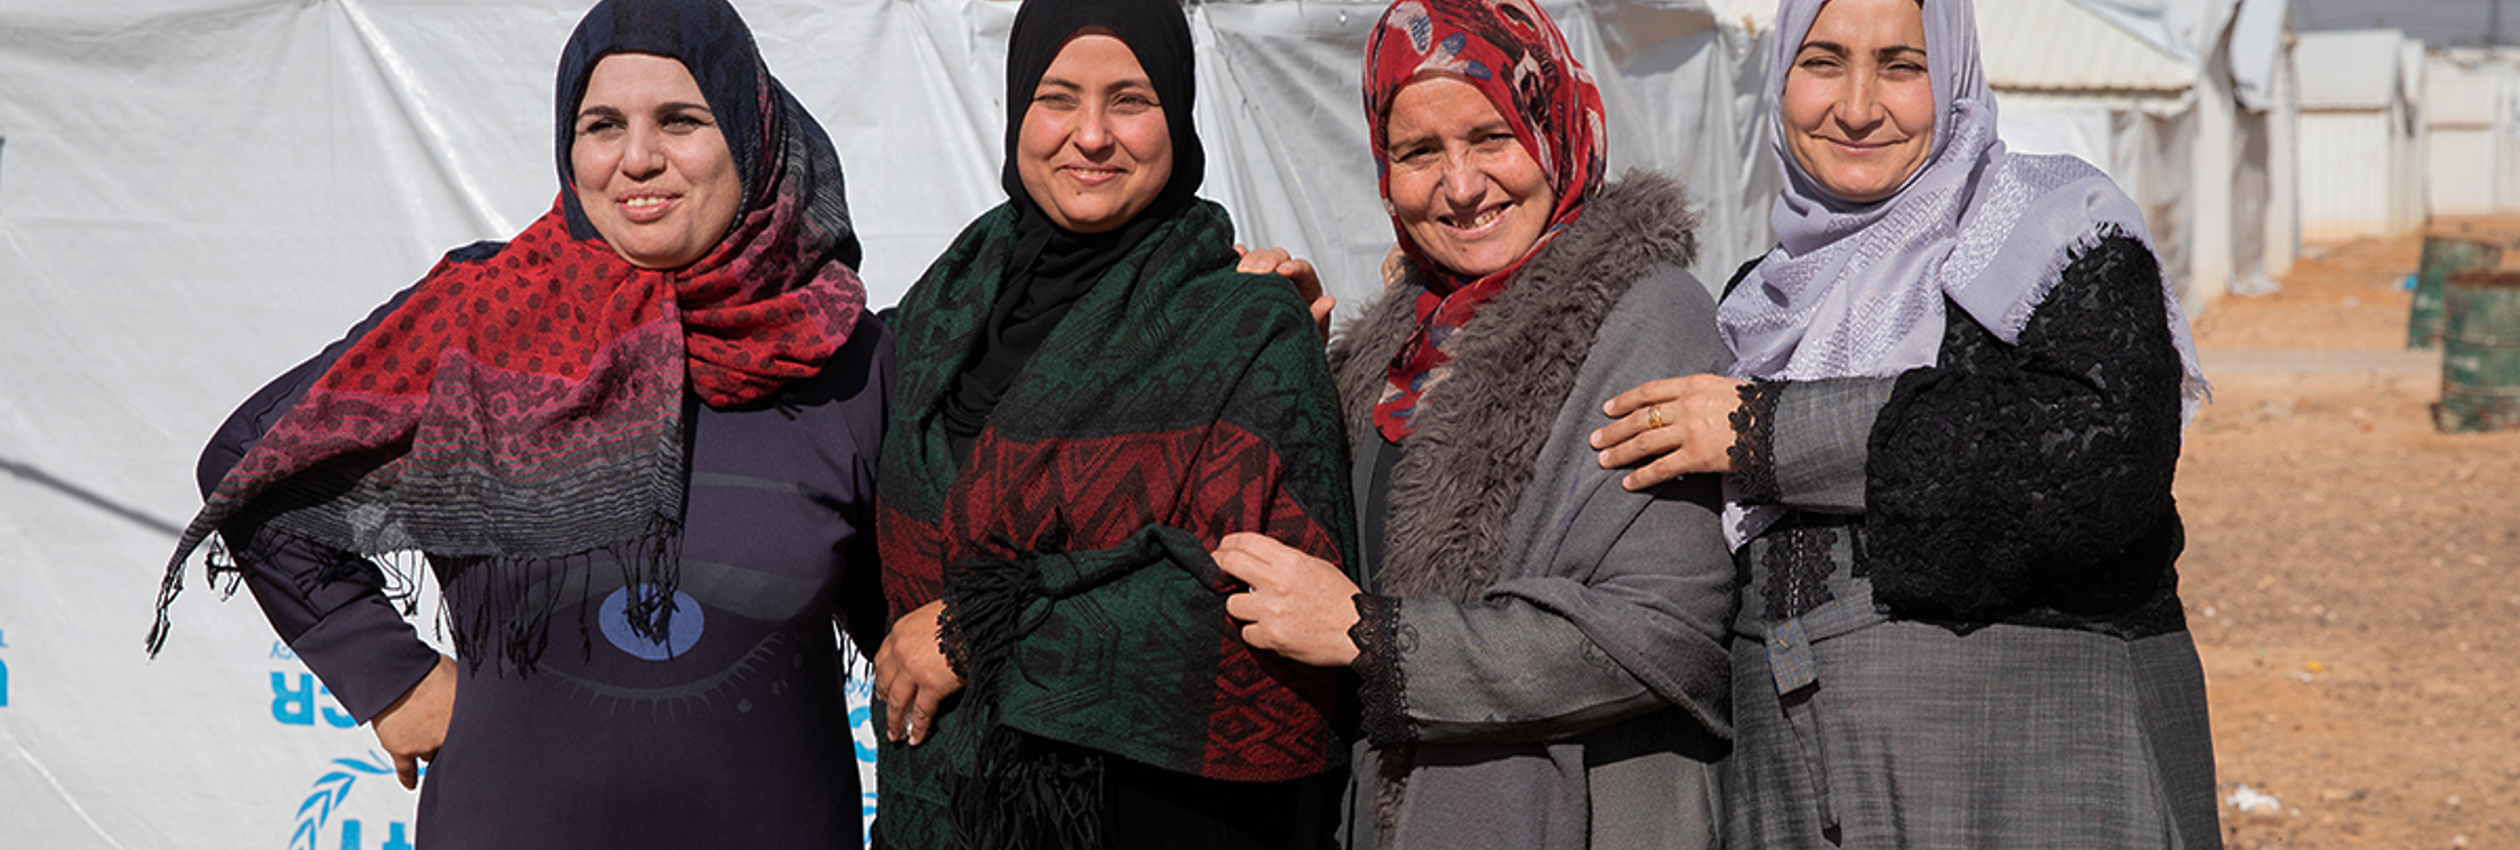 Samira, Samaher, Kholoud and Itidal live in Azraq refugee camp in Jordan and are part of an artisan collective supported by UNHCR. @UNHCR/Jordi Matas